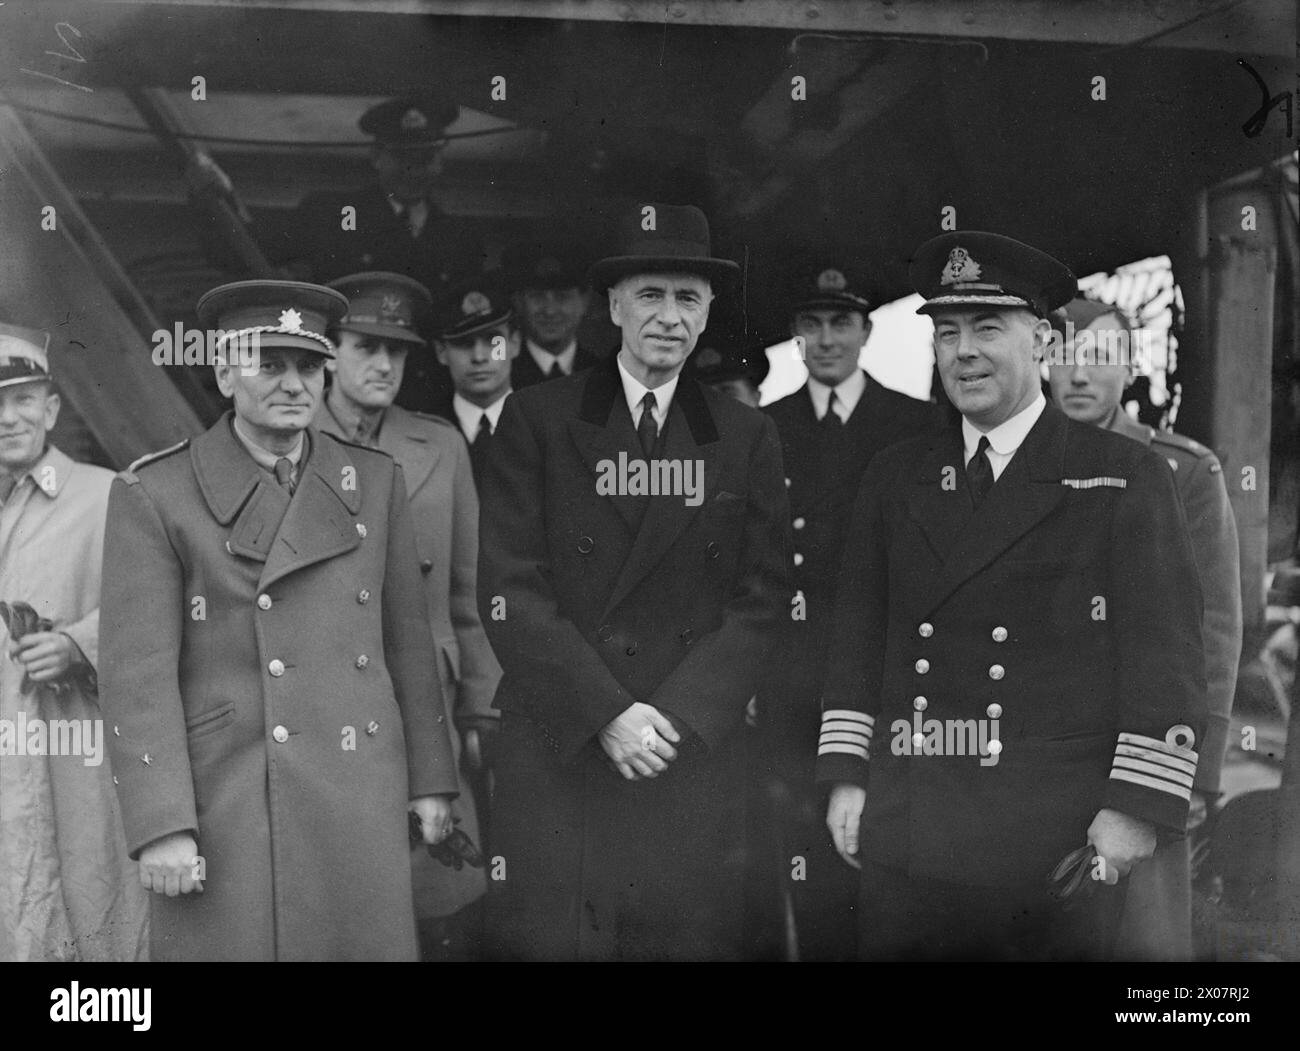 THE POLISH NAVY IN BRITAIN, 1939-1947 - Other identified personalities in the group - General Izydor Modelski (far left) and Lieutenant Jerzy Koziołkowski, one of the officers of the Polish submarine ORP Wilk (Wolf - third from the right). General Jan Sergěj Ingr, the Czech Minister of National Defense; Polish President-in-Exile Władysław Raczkiewicz; and Captain H. C. Ionides, Captain of the submarine depot ship HMS Titania; probably on board HMS Titania during an inspection of Polish submarines by President Raczkiewicz at Rosyth, 1940  Royal Navy, Polish Navy, Polish Navy, ORP Wilk, Submarin Stock Photo